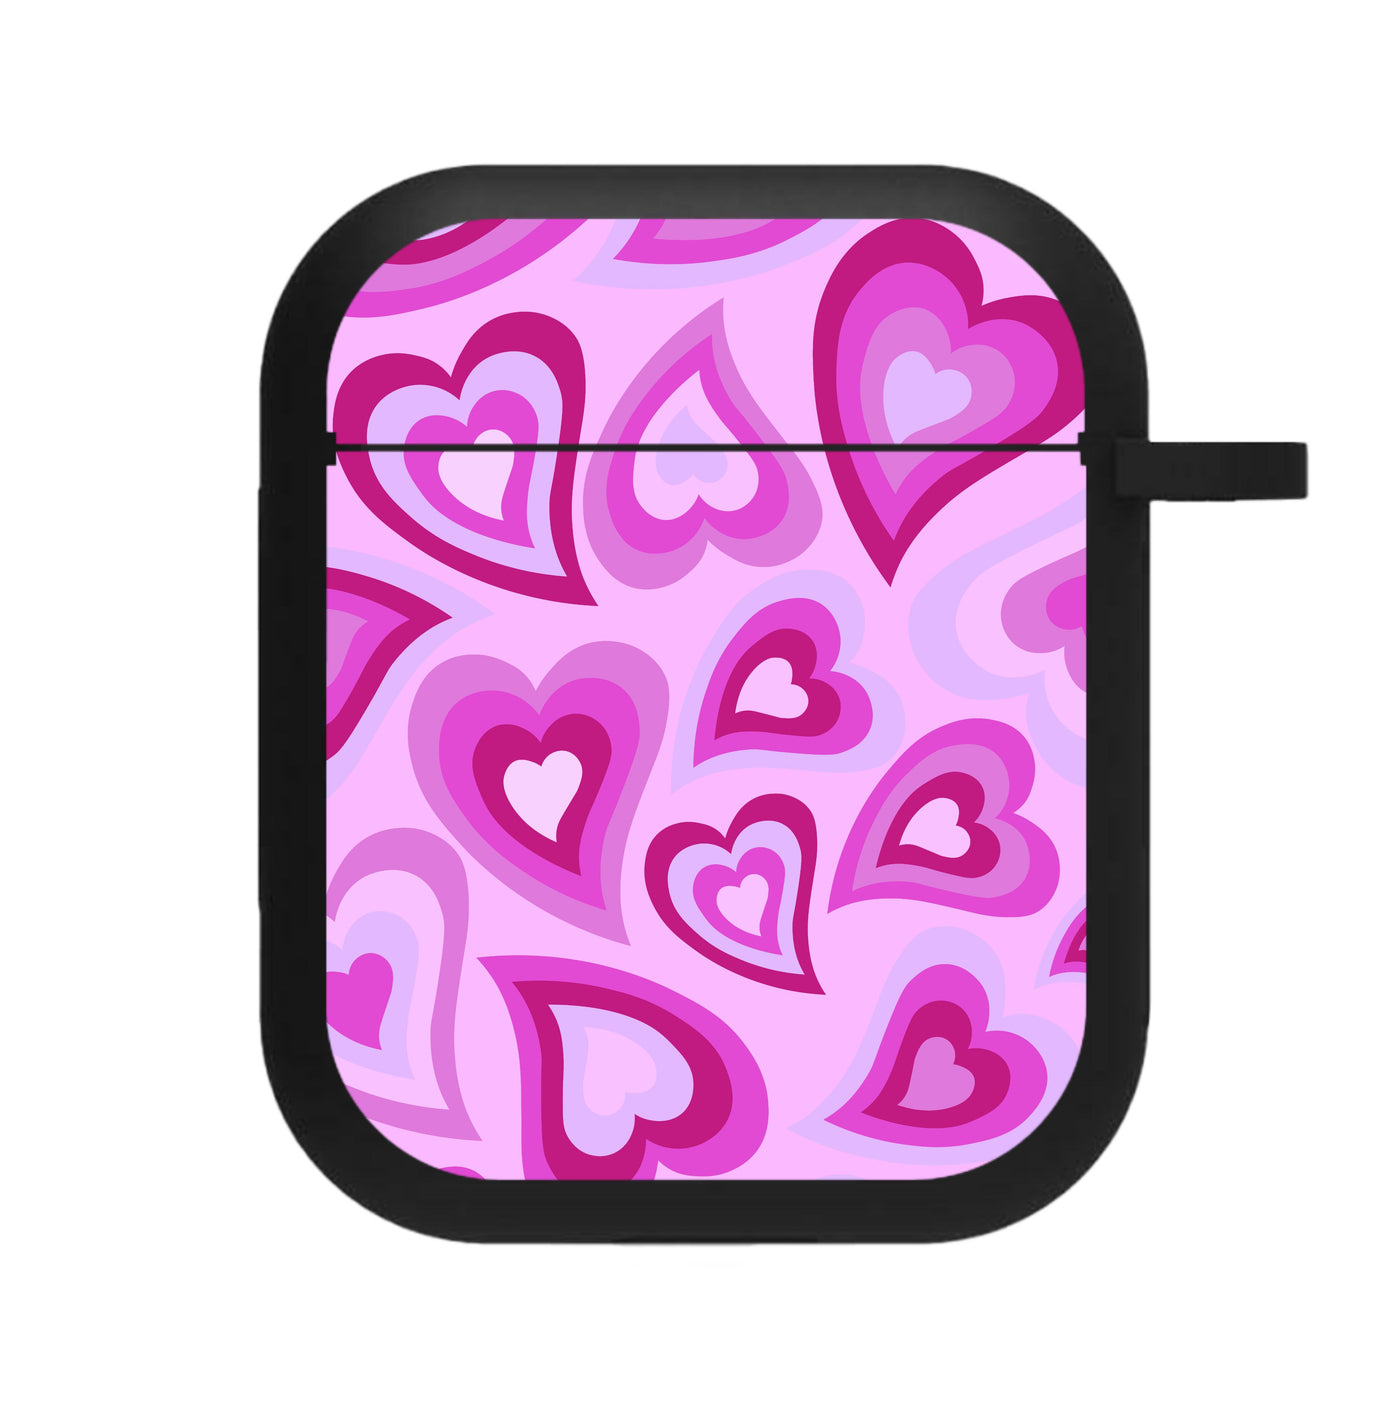 Pink Hearts - Trippy Patterns AirPods Case